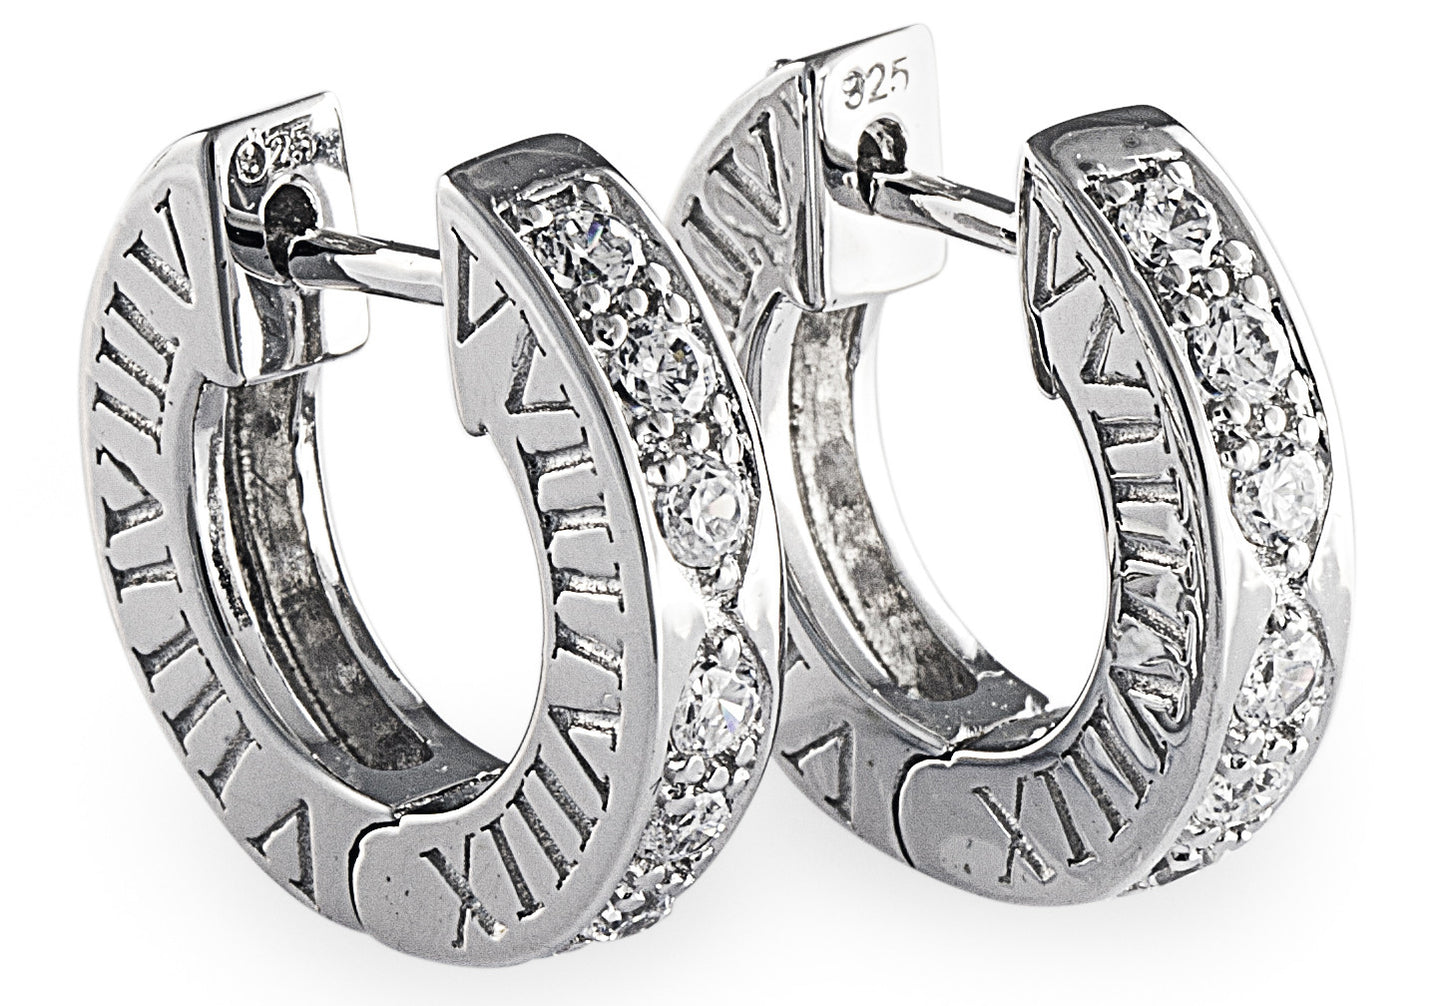 Zion Bling Cuff Earrings are solid 925 cuffs that feature cubic zirconia stones and our Signature Roman Numeral imprint on the sides to compliment our Signature Roman numeral range. Matches our Bzero Bling Pendant. Result: Takes you to Europe.